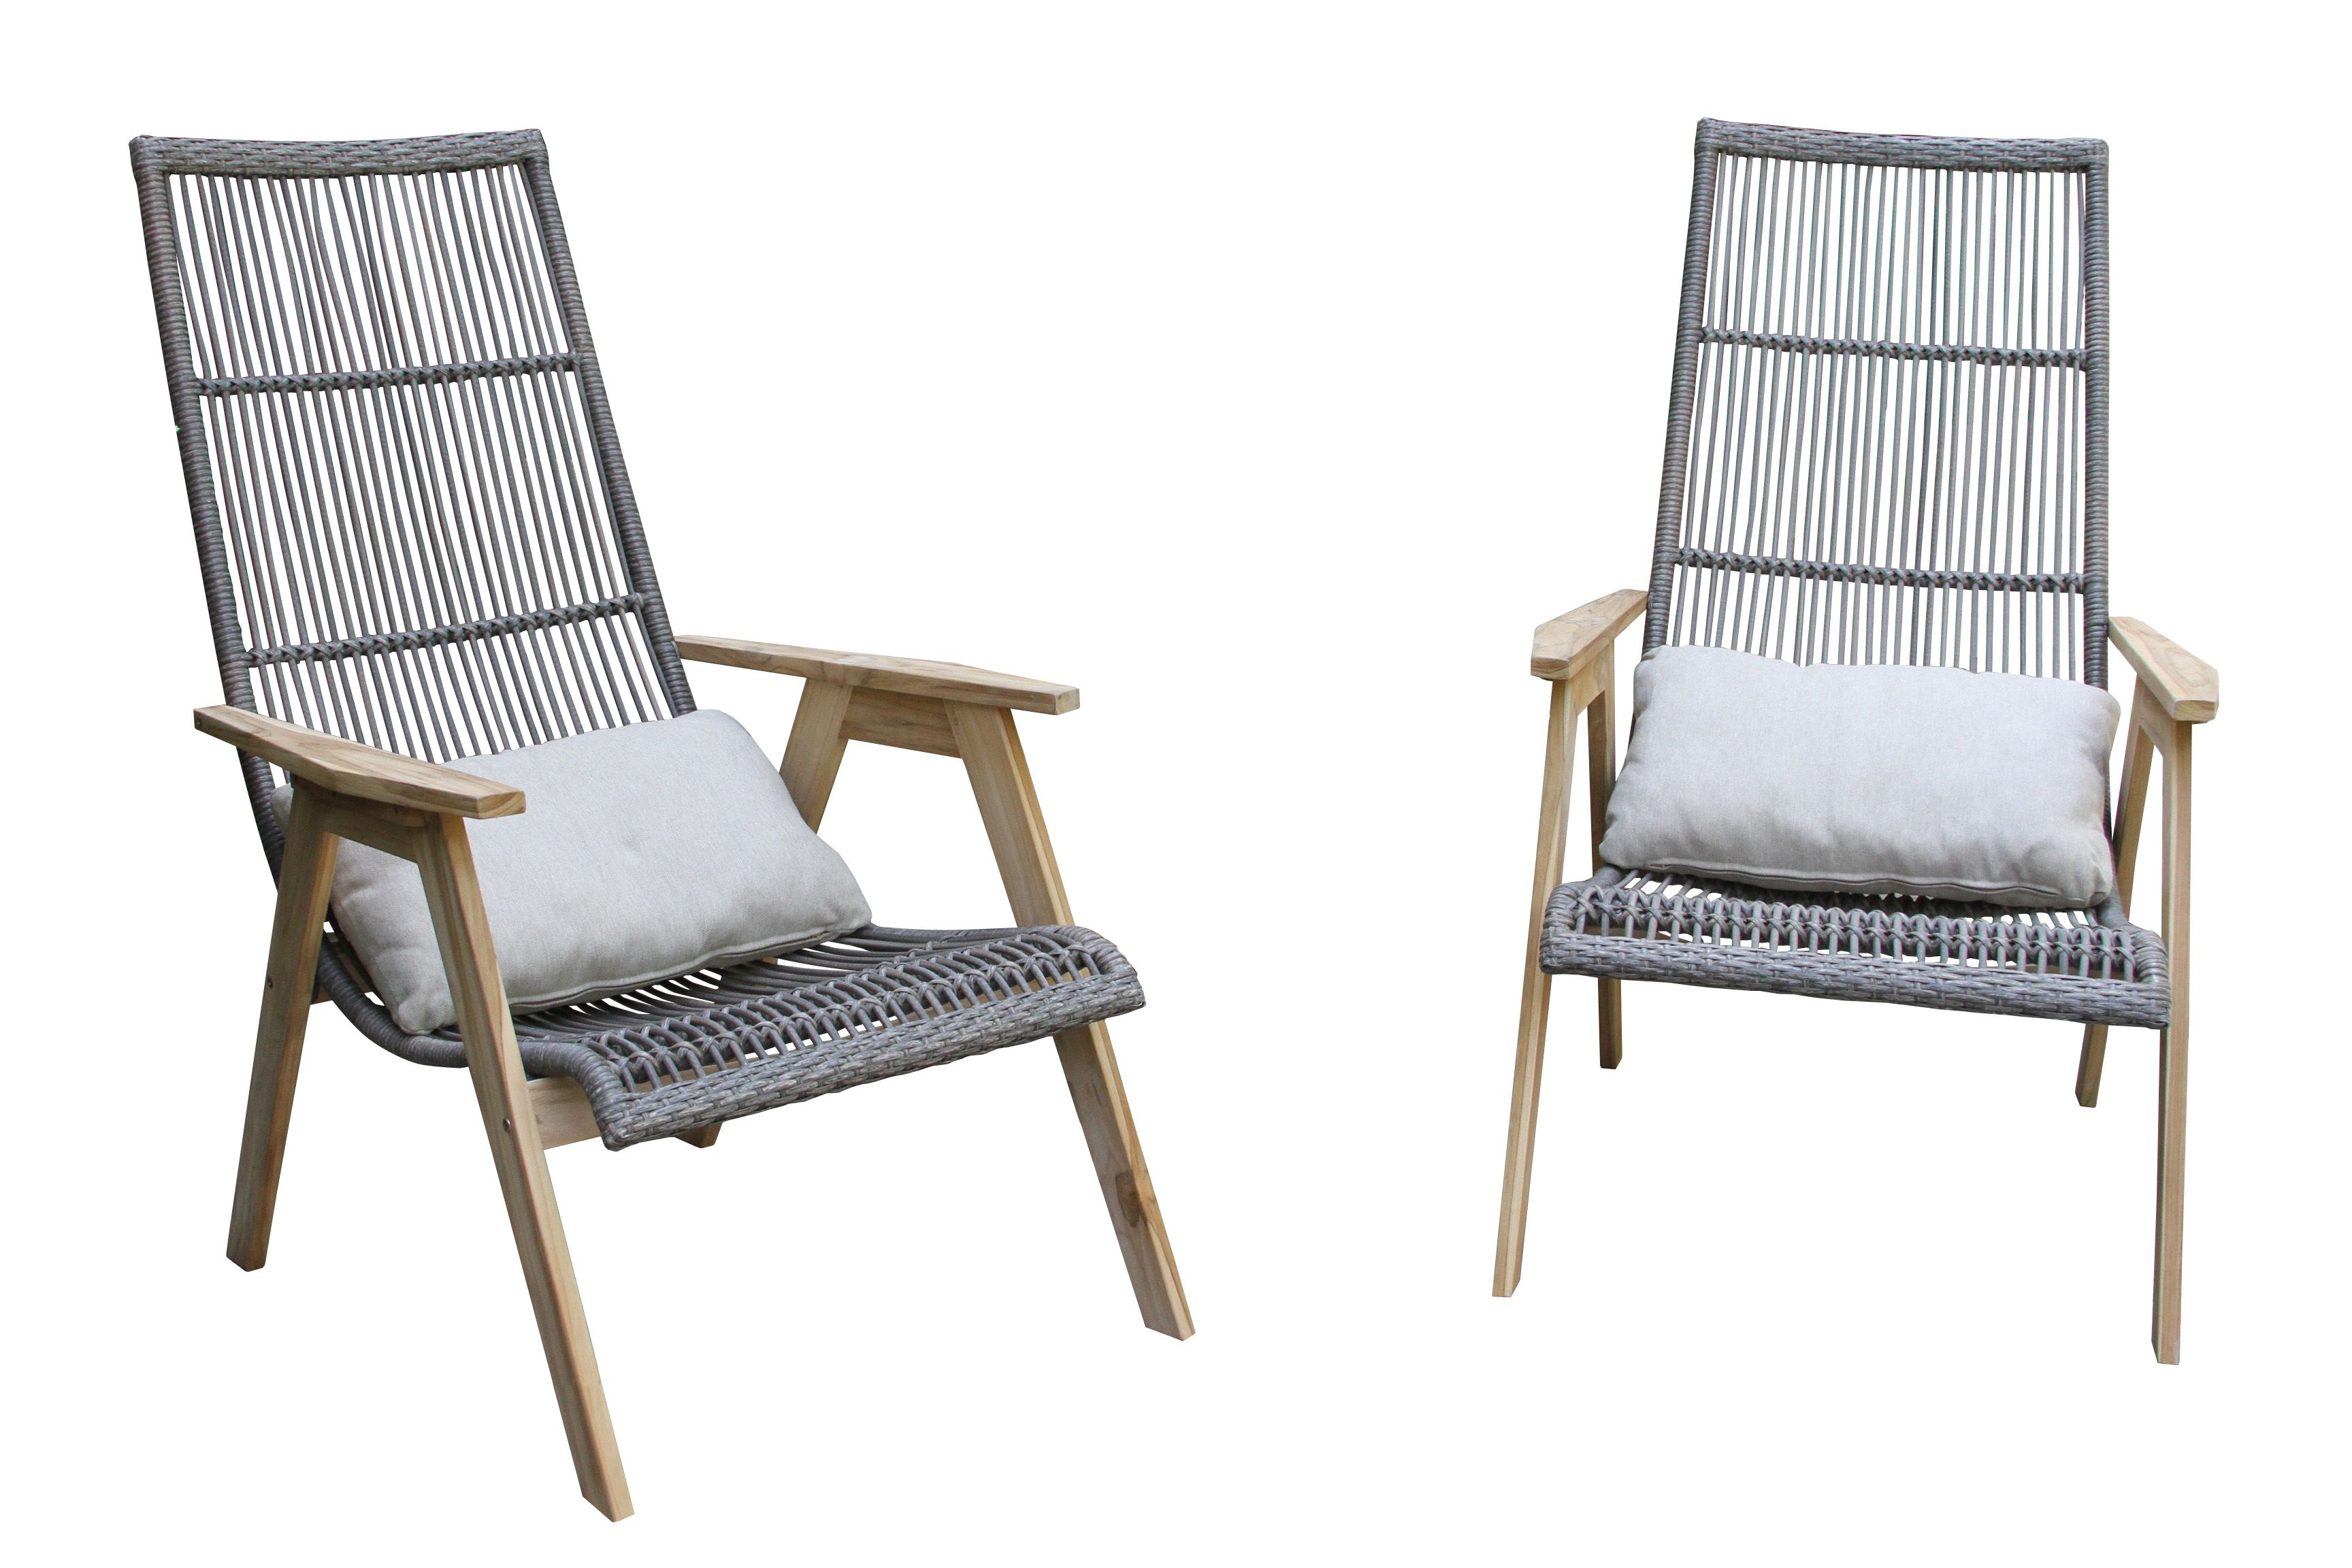 Outdoor Interiors Teak and Wicker Basket Lounge Chair - Set of 2